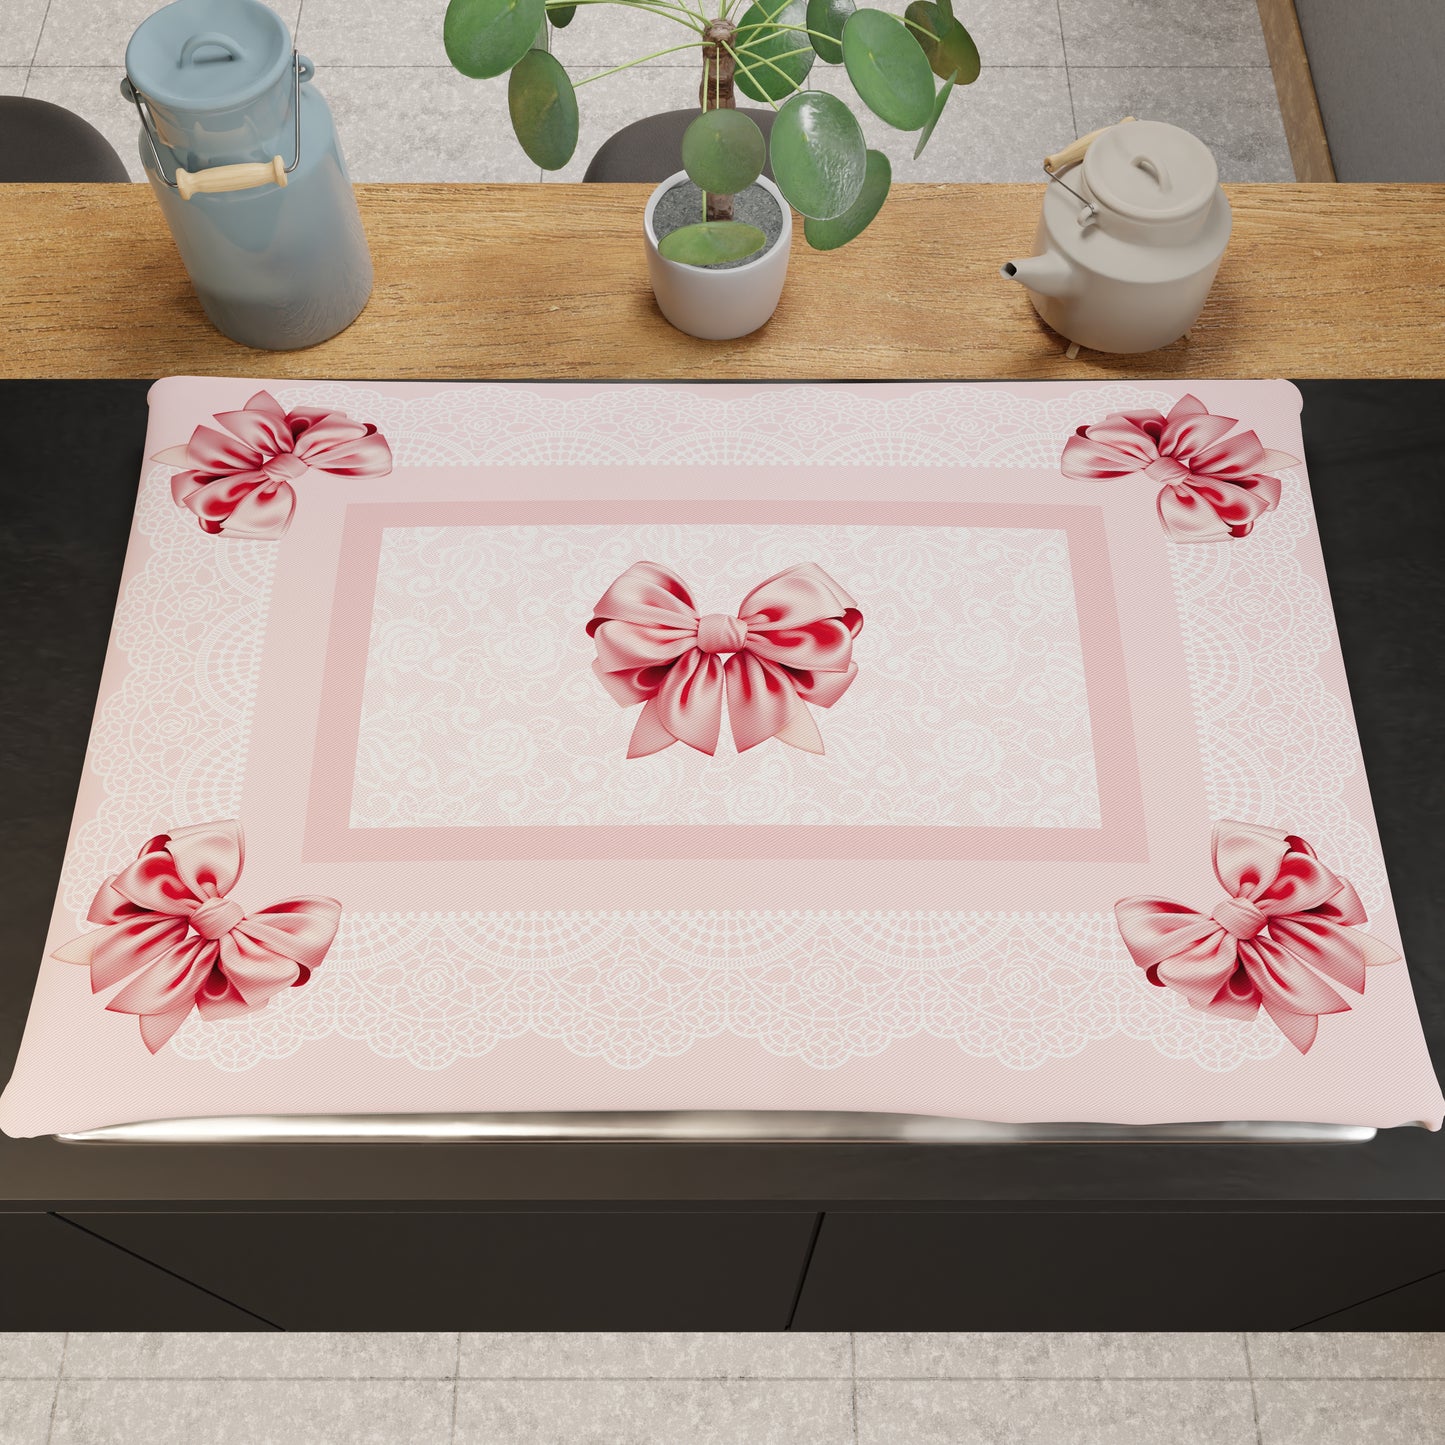 Kitchen Stove Cover in Digital Print Bow 1pc 46x70cm